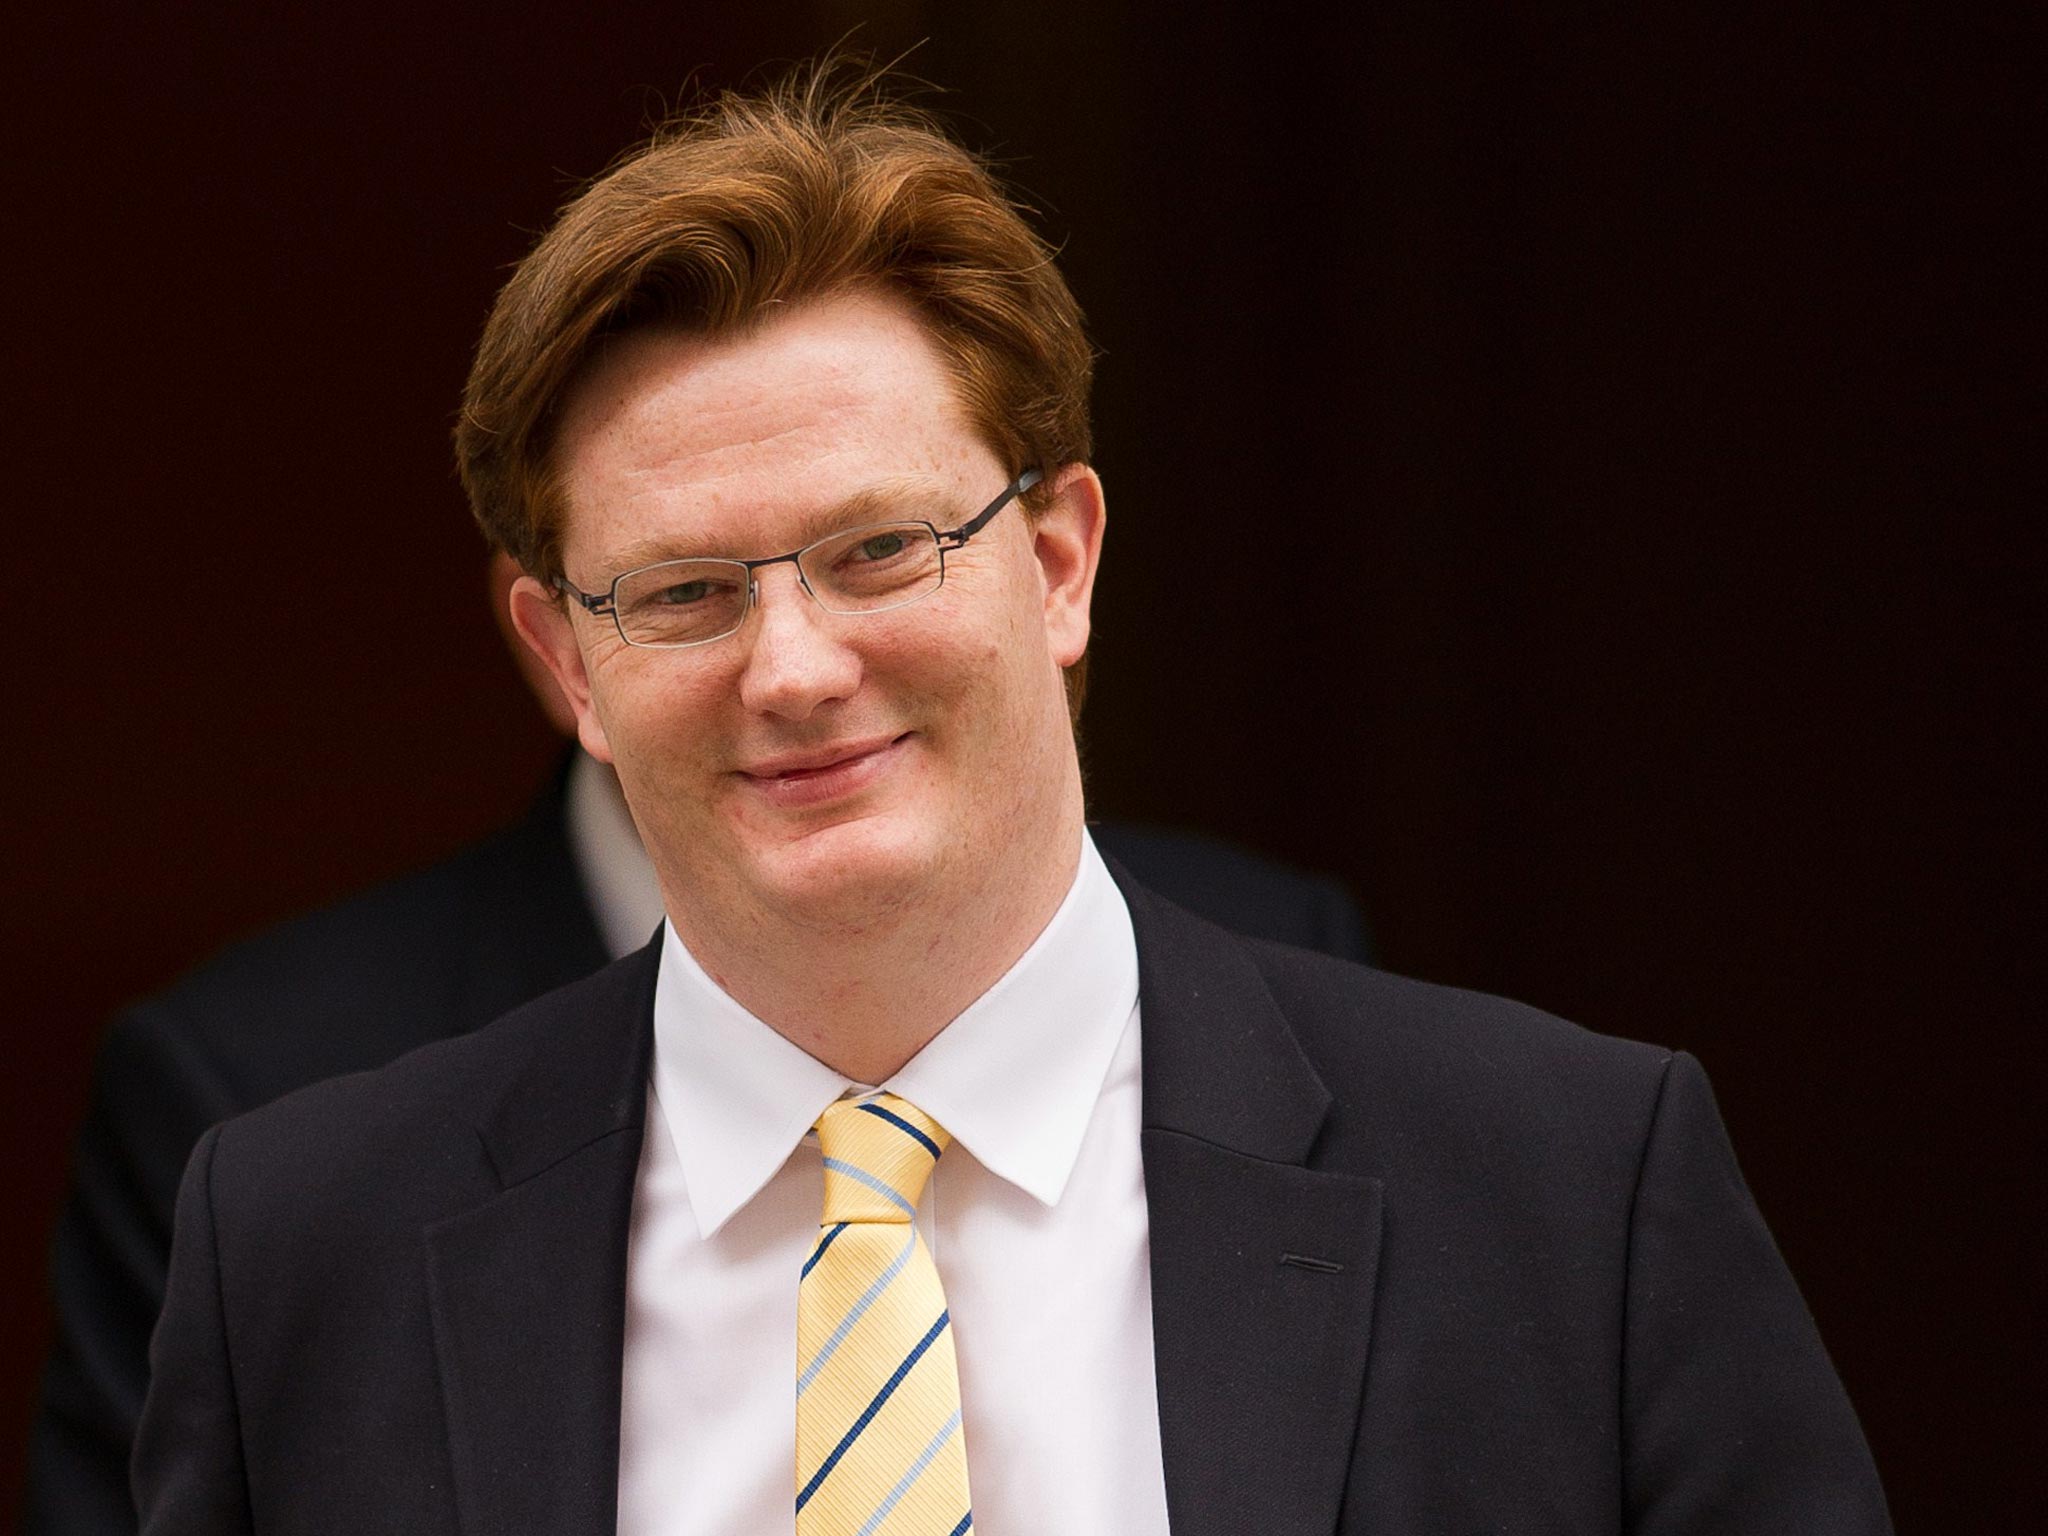 Nick Clegg and Danny Alexander have written a joint article for The Independent’s
website setting out the Lib Dems’ stance on tax and spending in the 2015-20
parliament